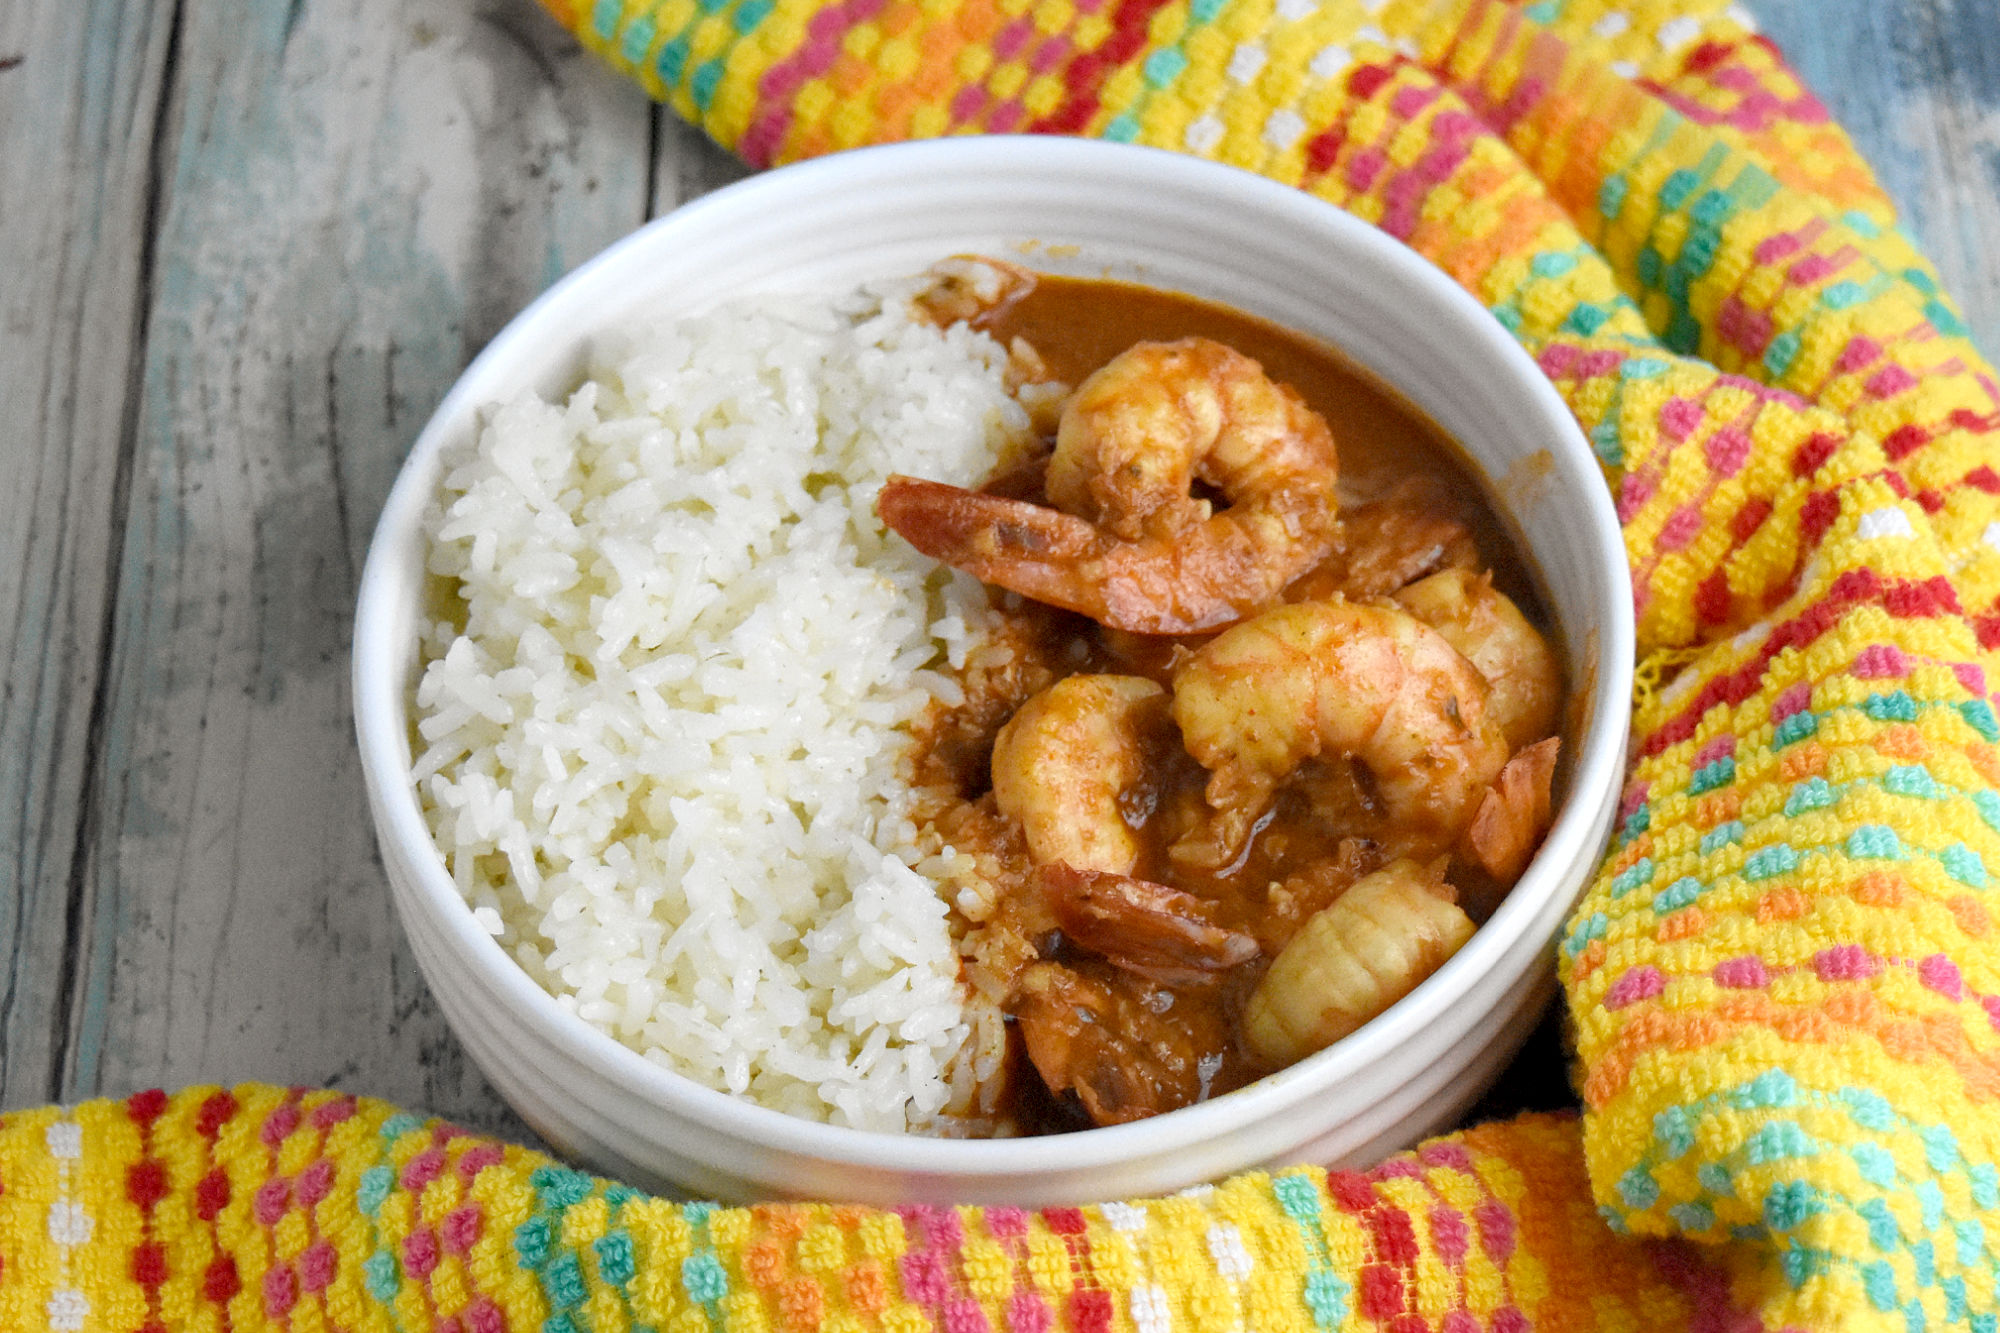 If you want an easy but amazing appetizer, then try these New Orleans Style Barbecue Shrimp. They’re quick, simple, and packed with spicy New Orleans flavor. #OurFamilyTable #NationalShrimpDay #NewOrleansBBQShrimp #NewOrleansRecipe #shrimprecipe #BBQShrimp
